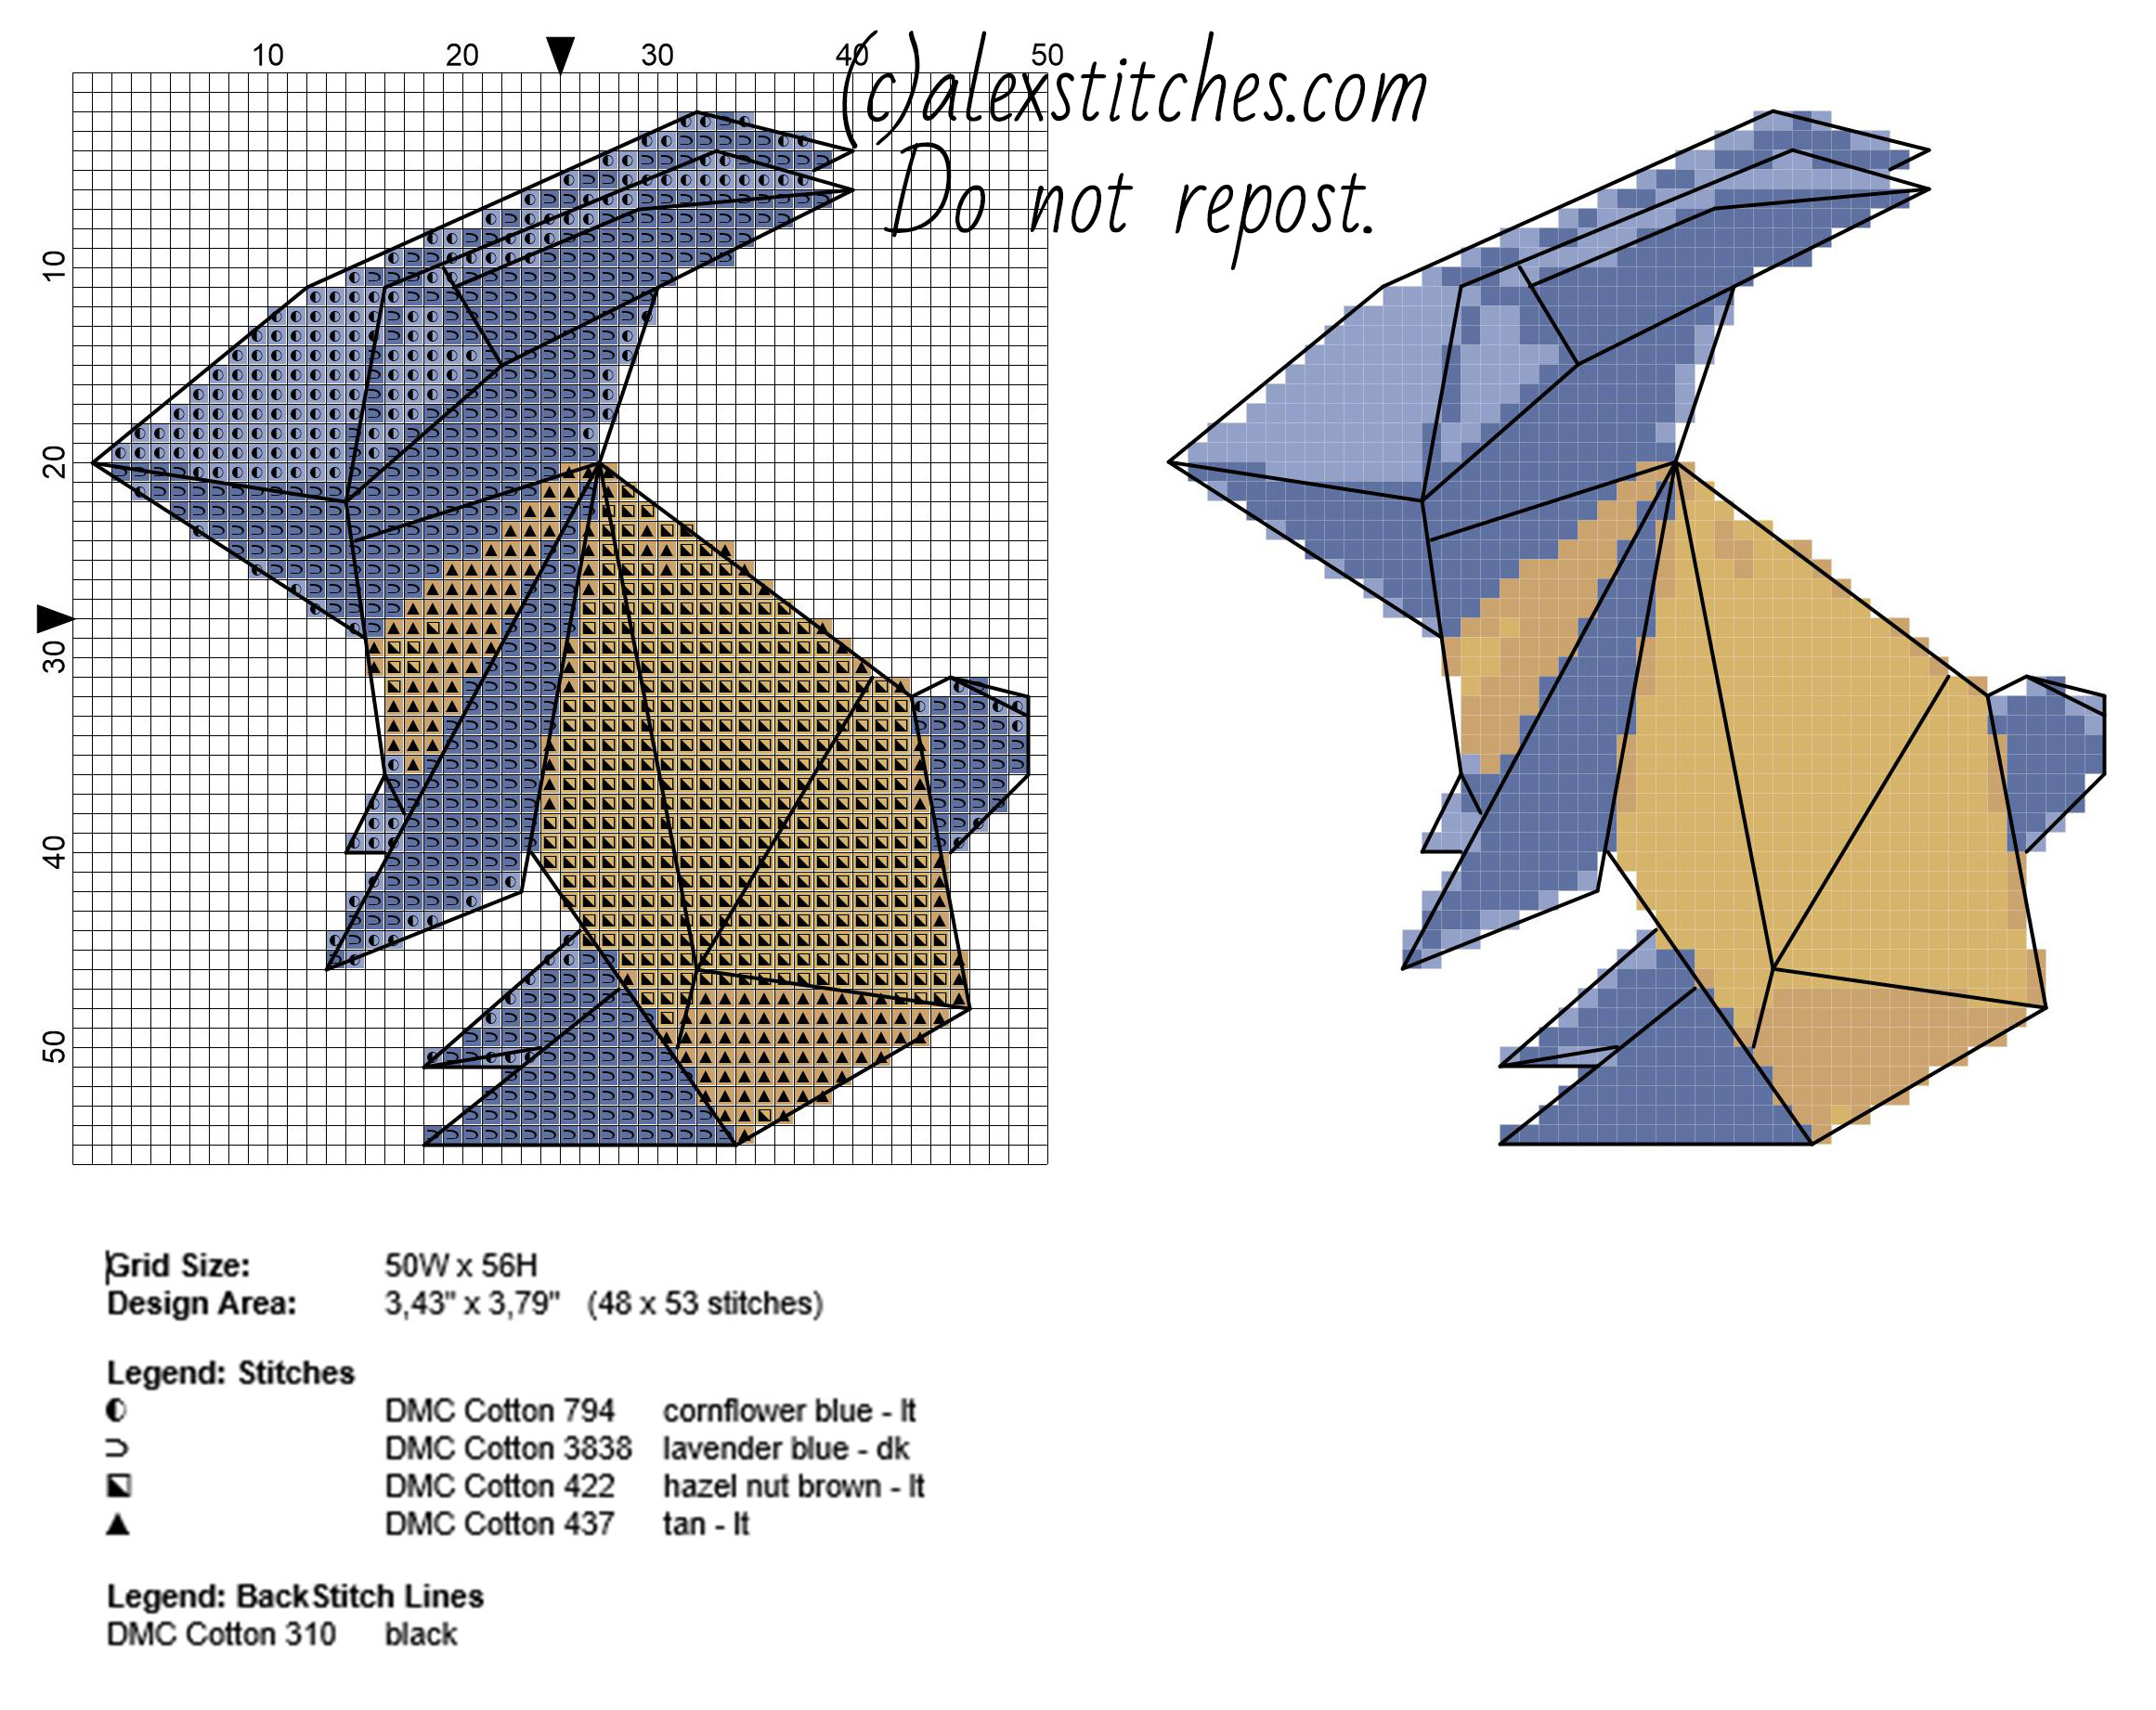 Origami Rabbit from To The Moon indie videogame free cross stitch pattern 48 x 53 stitches 5 DMC threads